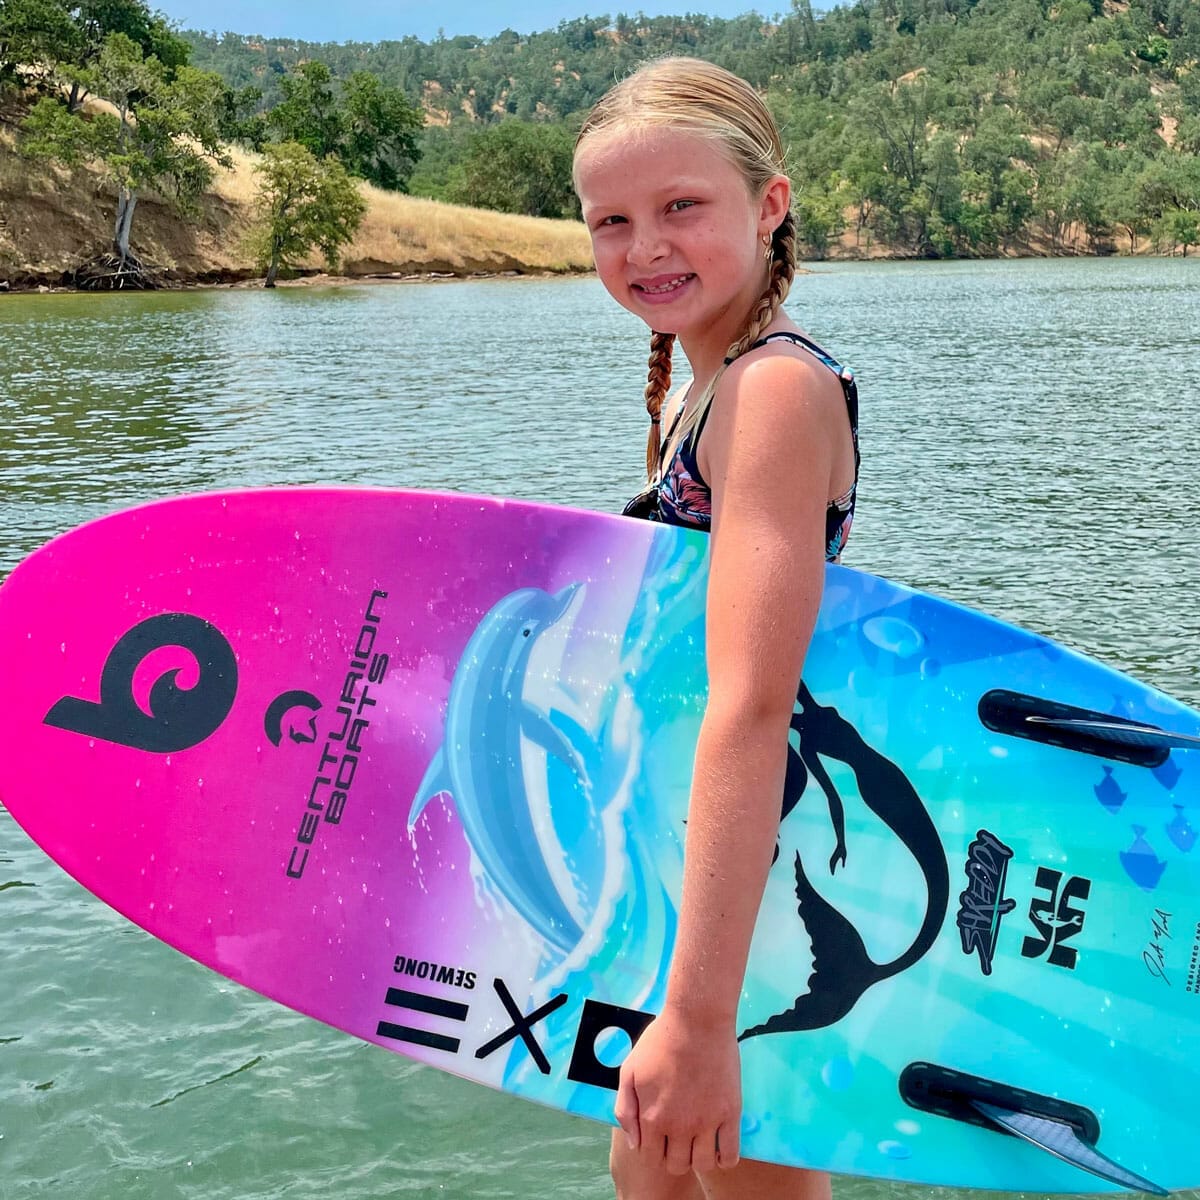 A young girl holding a wakesurf board in the water.